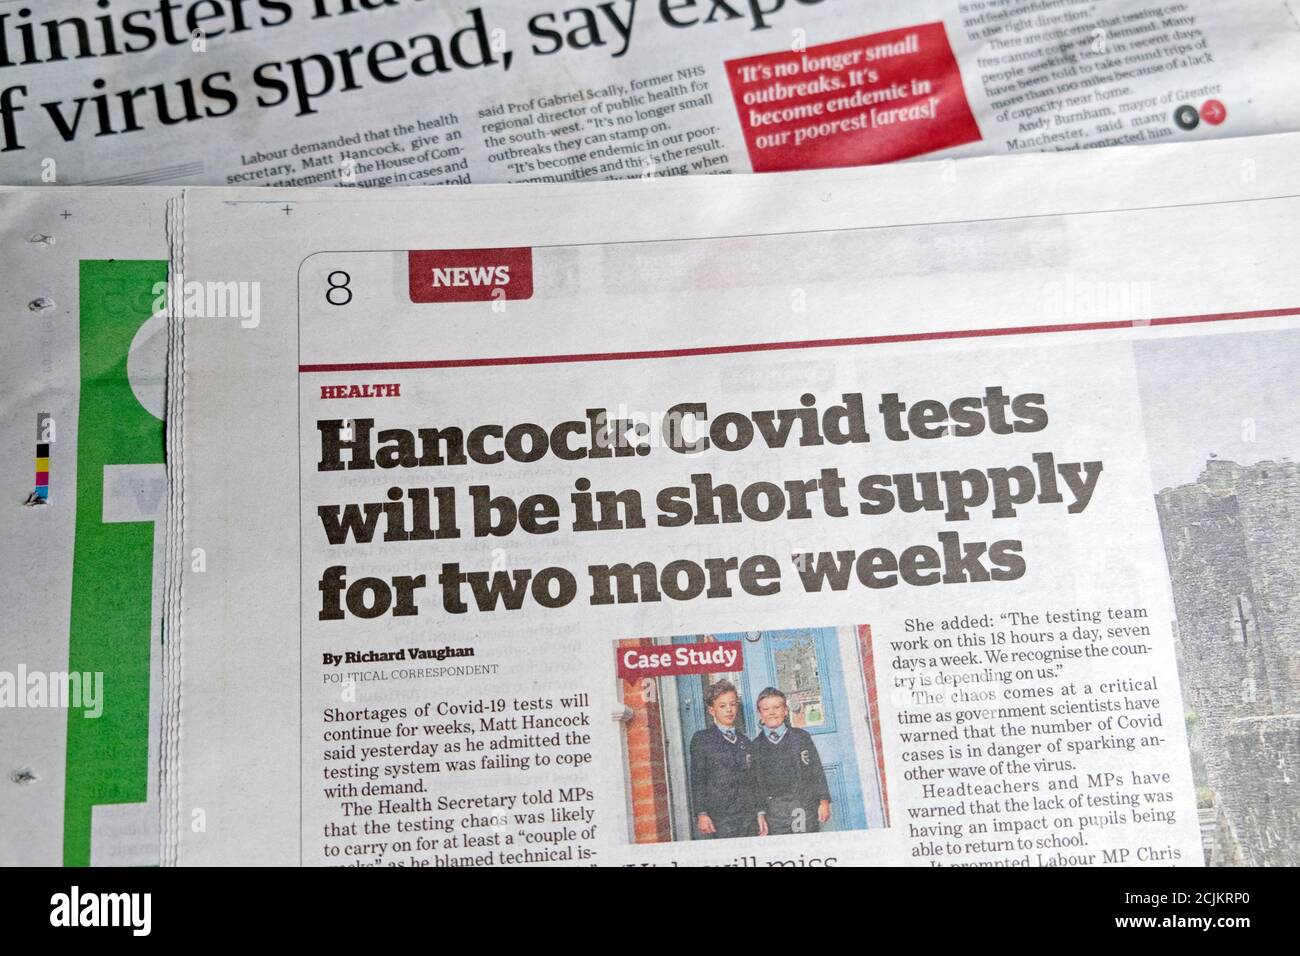 Hancock Covid Tests Will Be In Short Supply For Two More Weeks Coronavirus Covid 19 I Newspaper Headline Article 9 September London England Uk Stock Photo Alamy